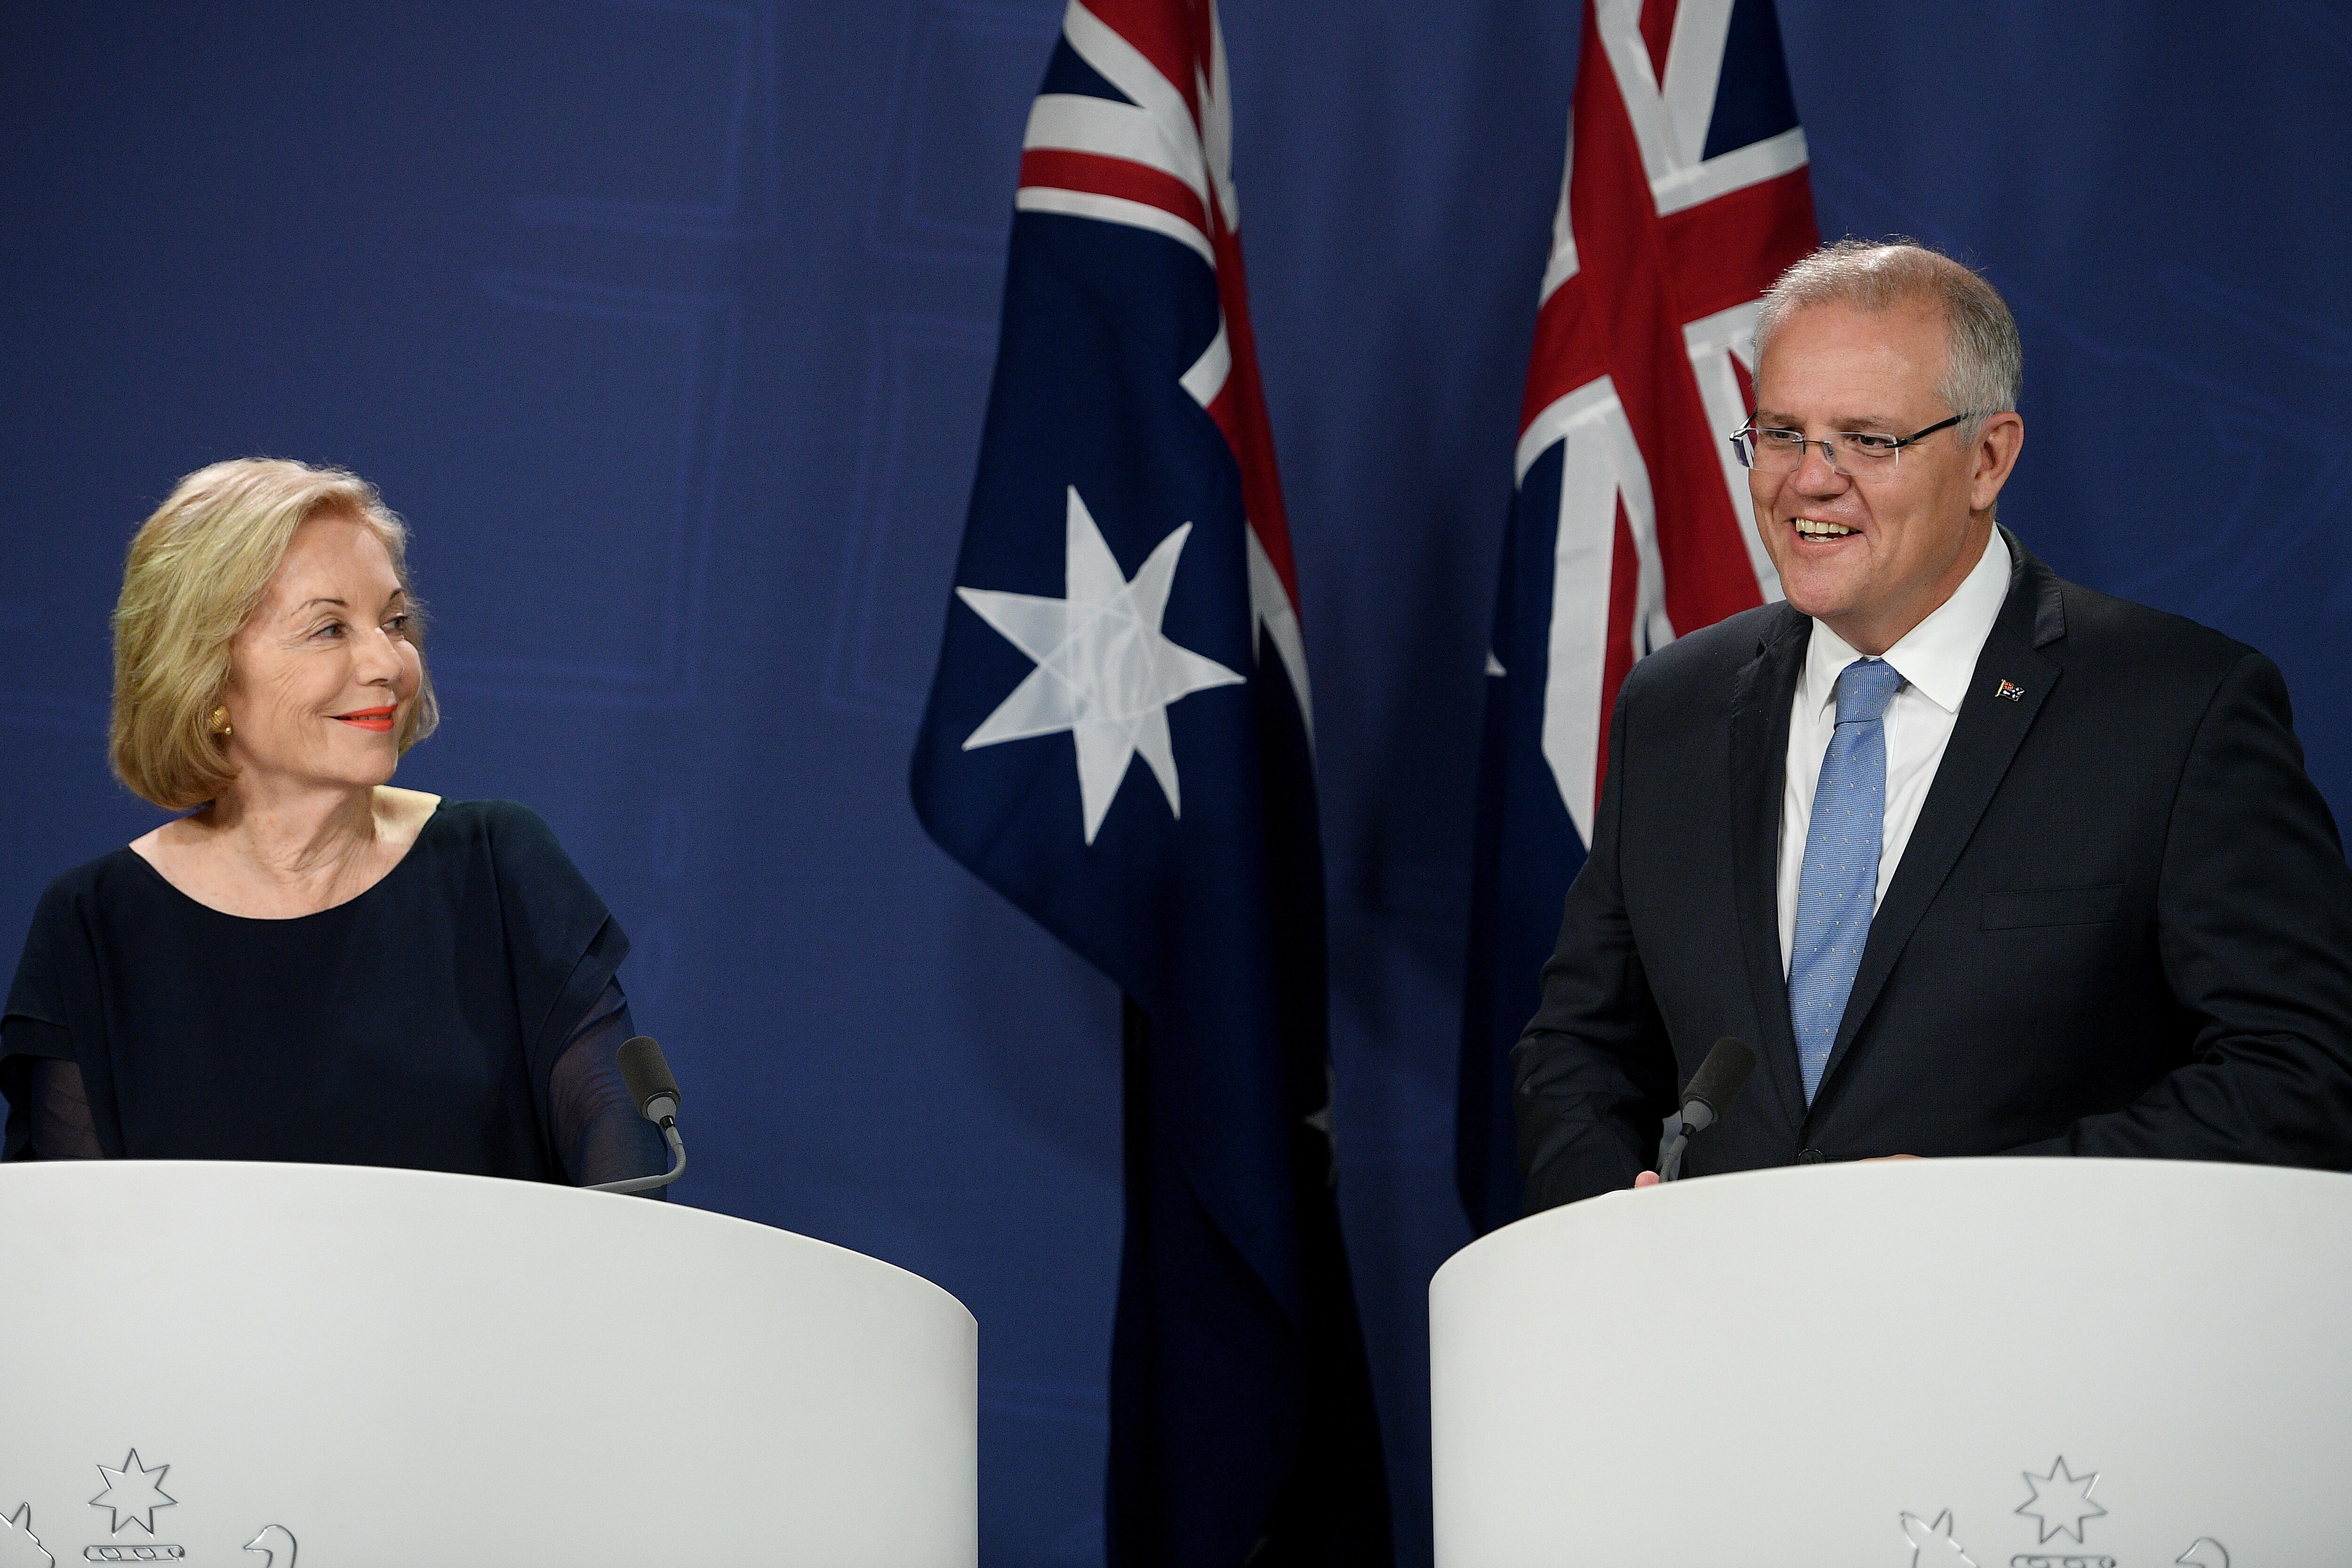 Prime Minister Morrison has announced the Government has recommended to the Governor-General that Ita Buttrose be appointed as the next Chair of the ABC. 